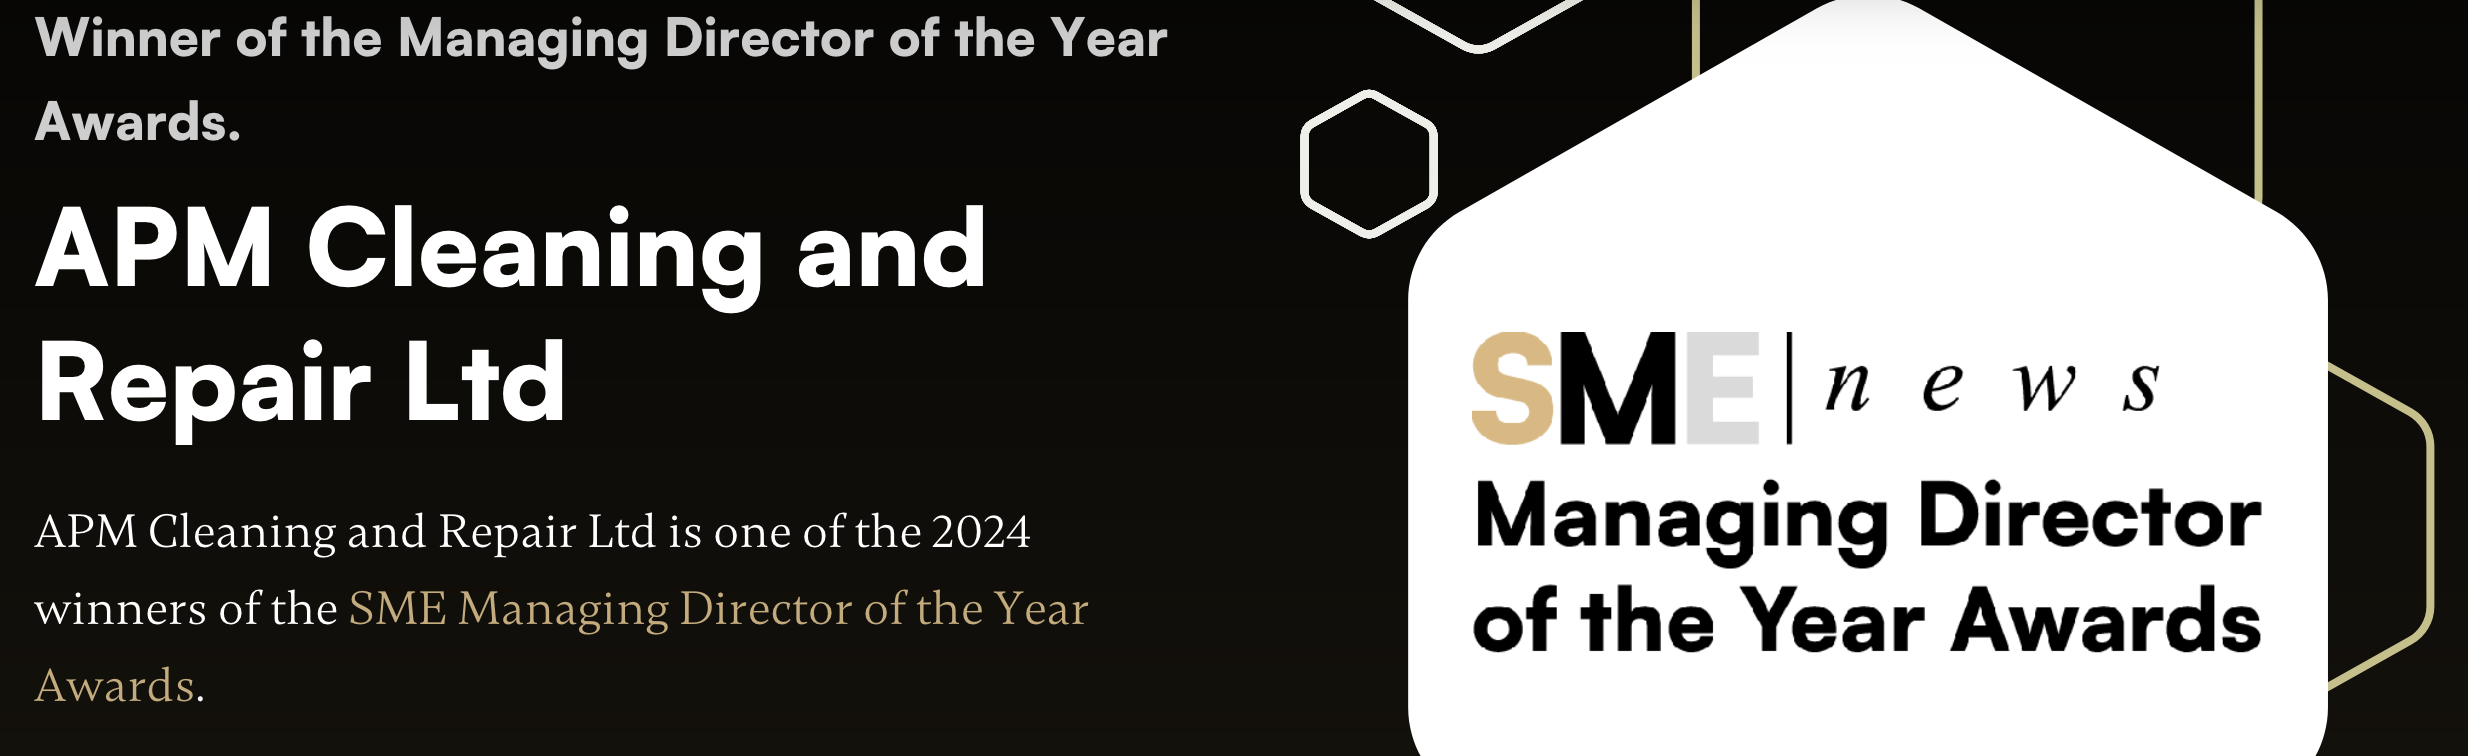 Winner of the Managing Director of the Year Awards